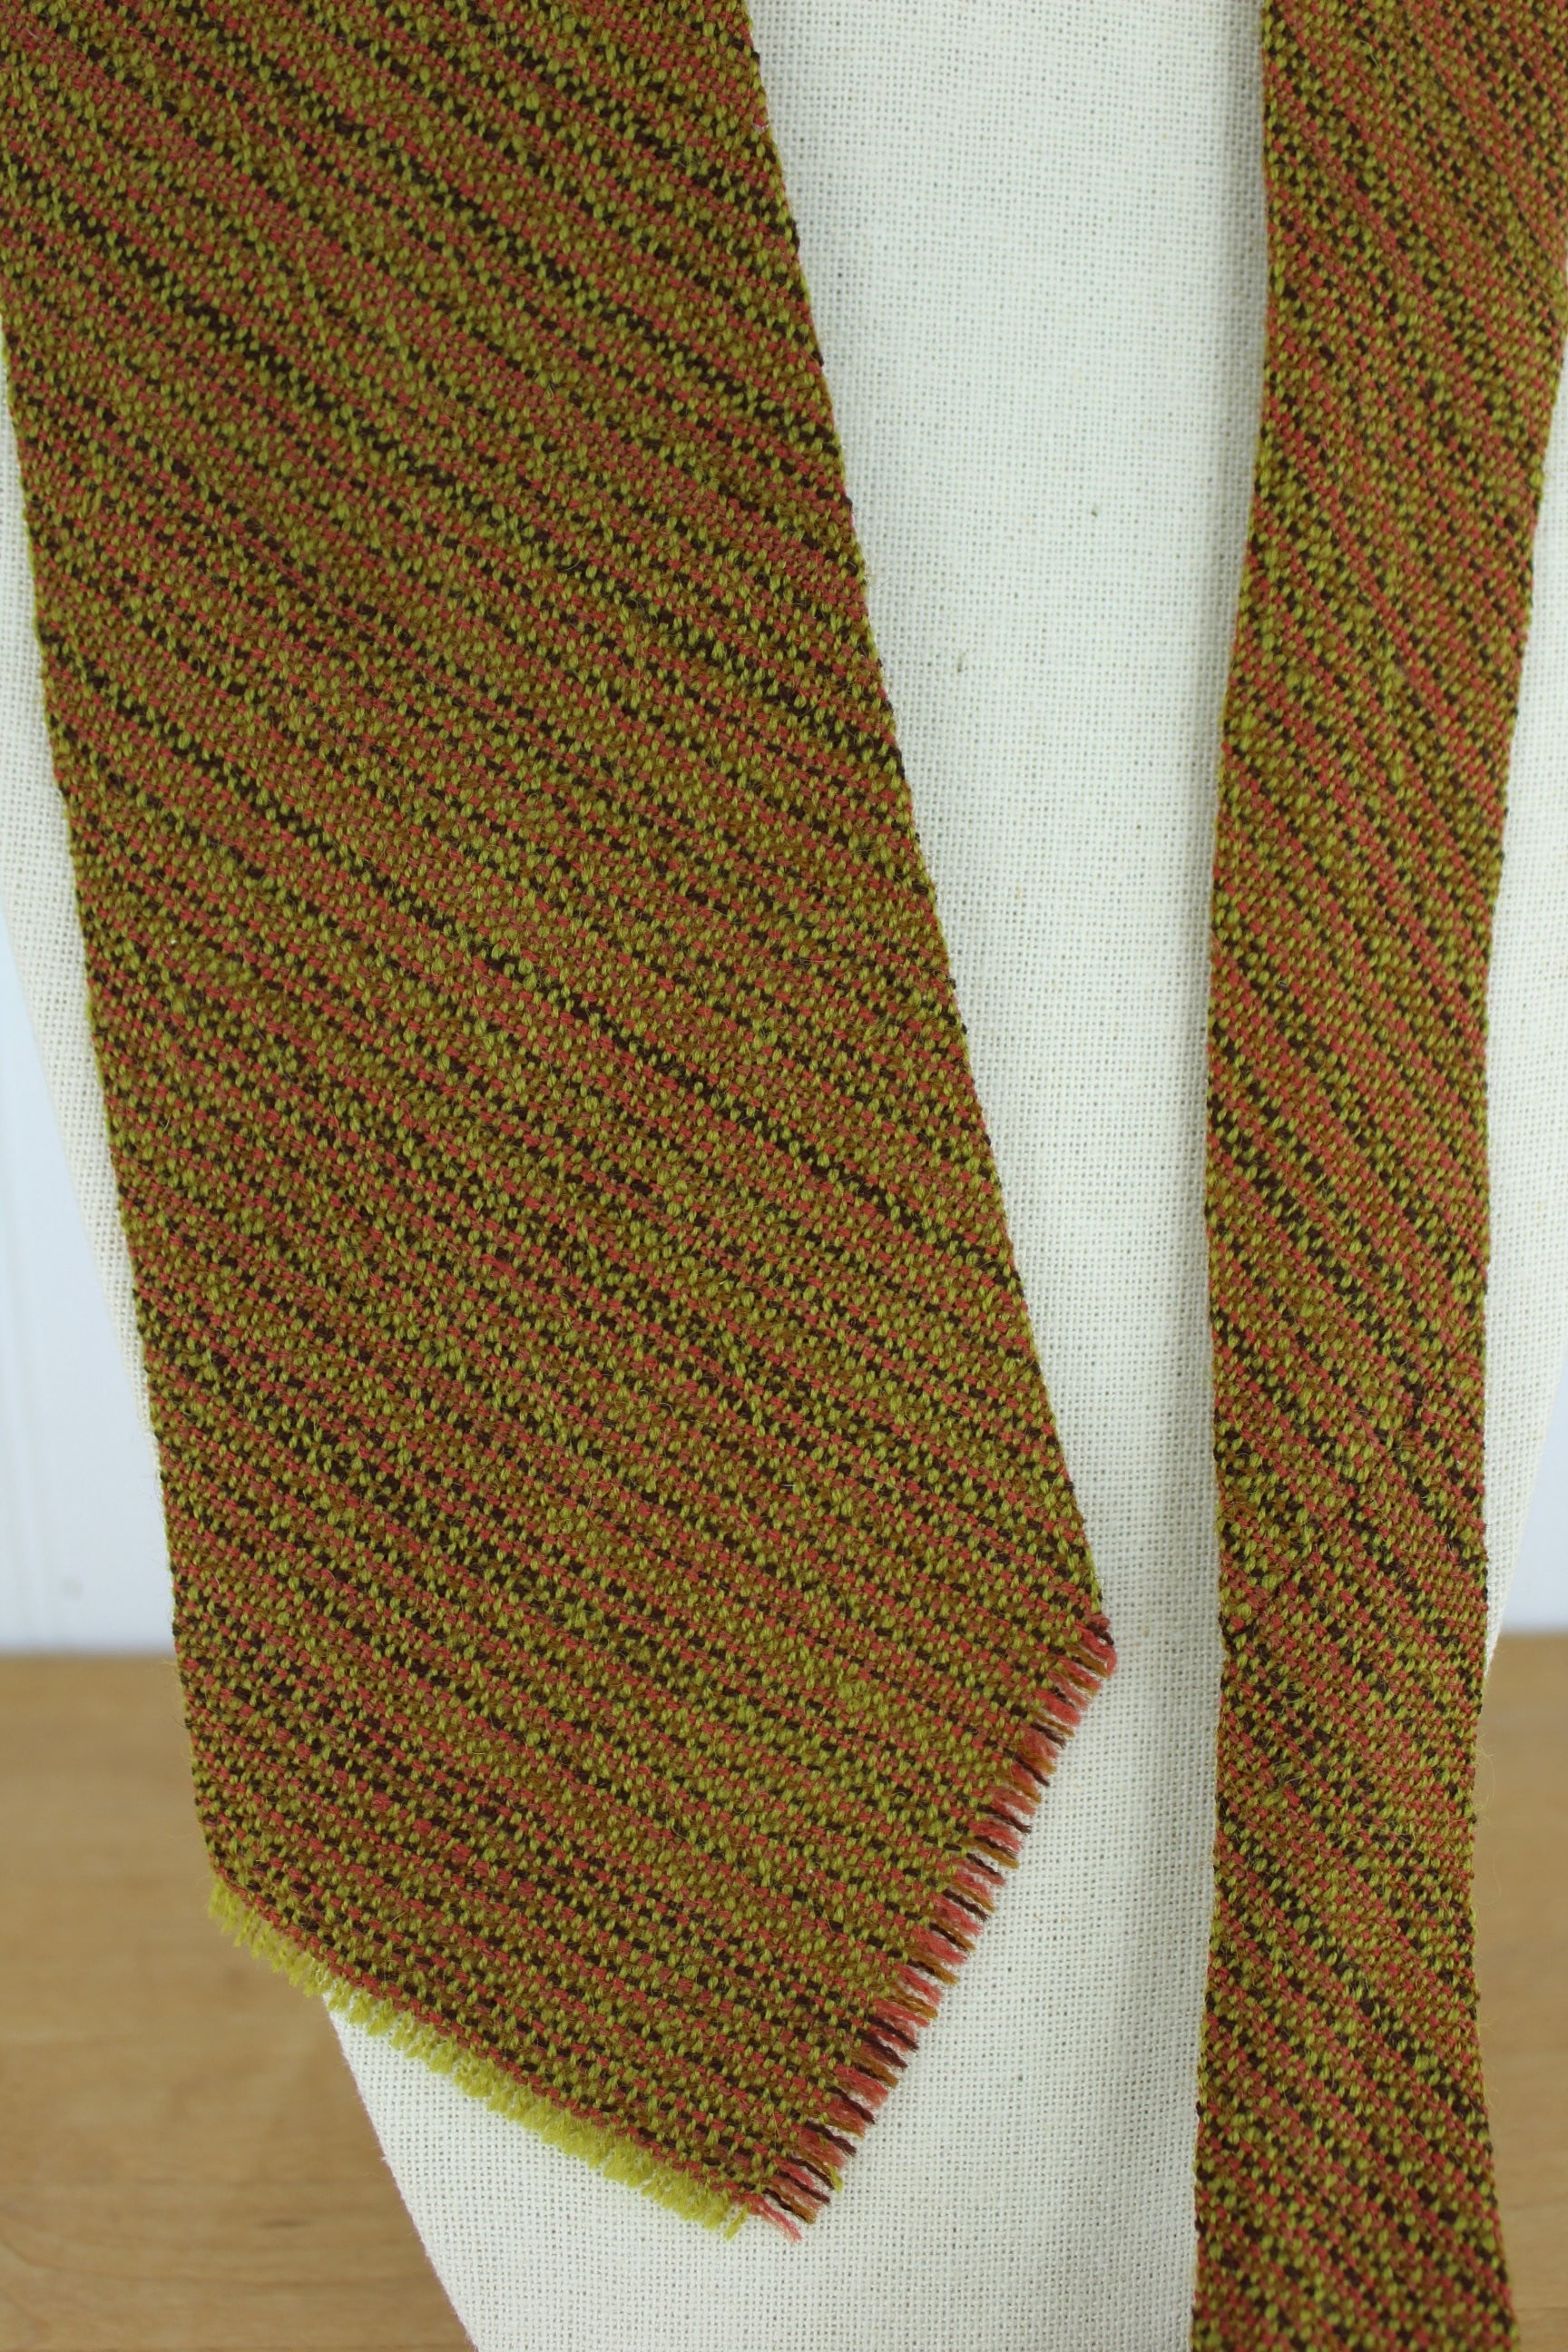 Berea College Student Craft Collectible Necktie - Wool Hand Woven Lovely Weave fine weave